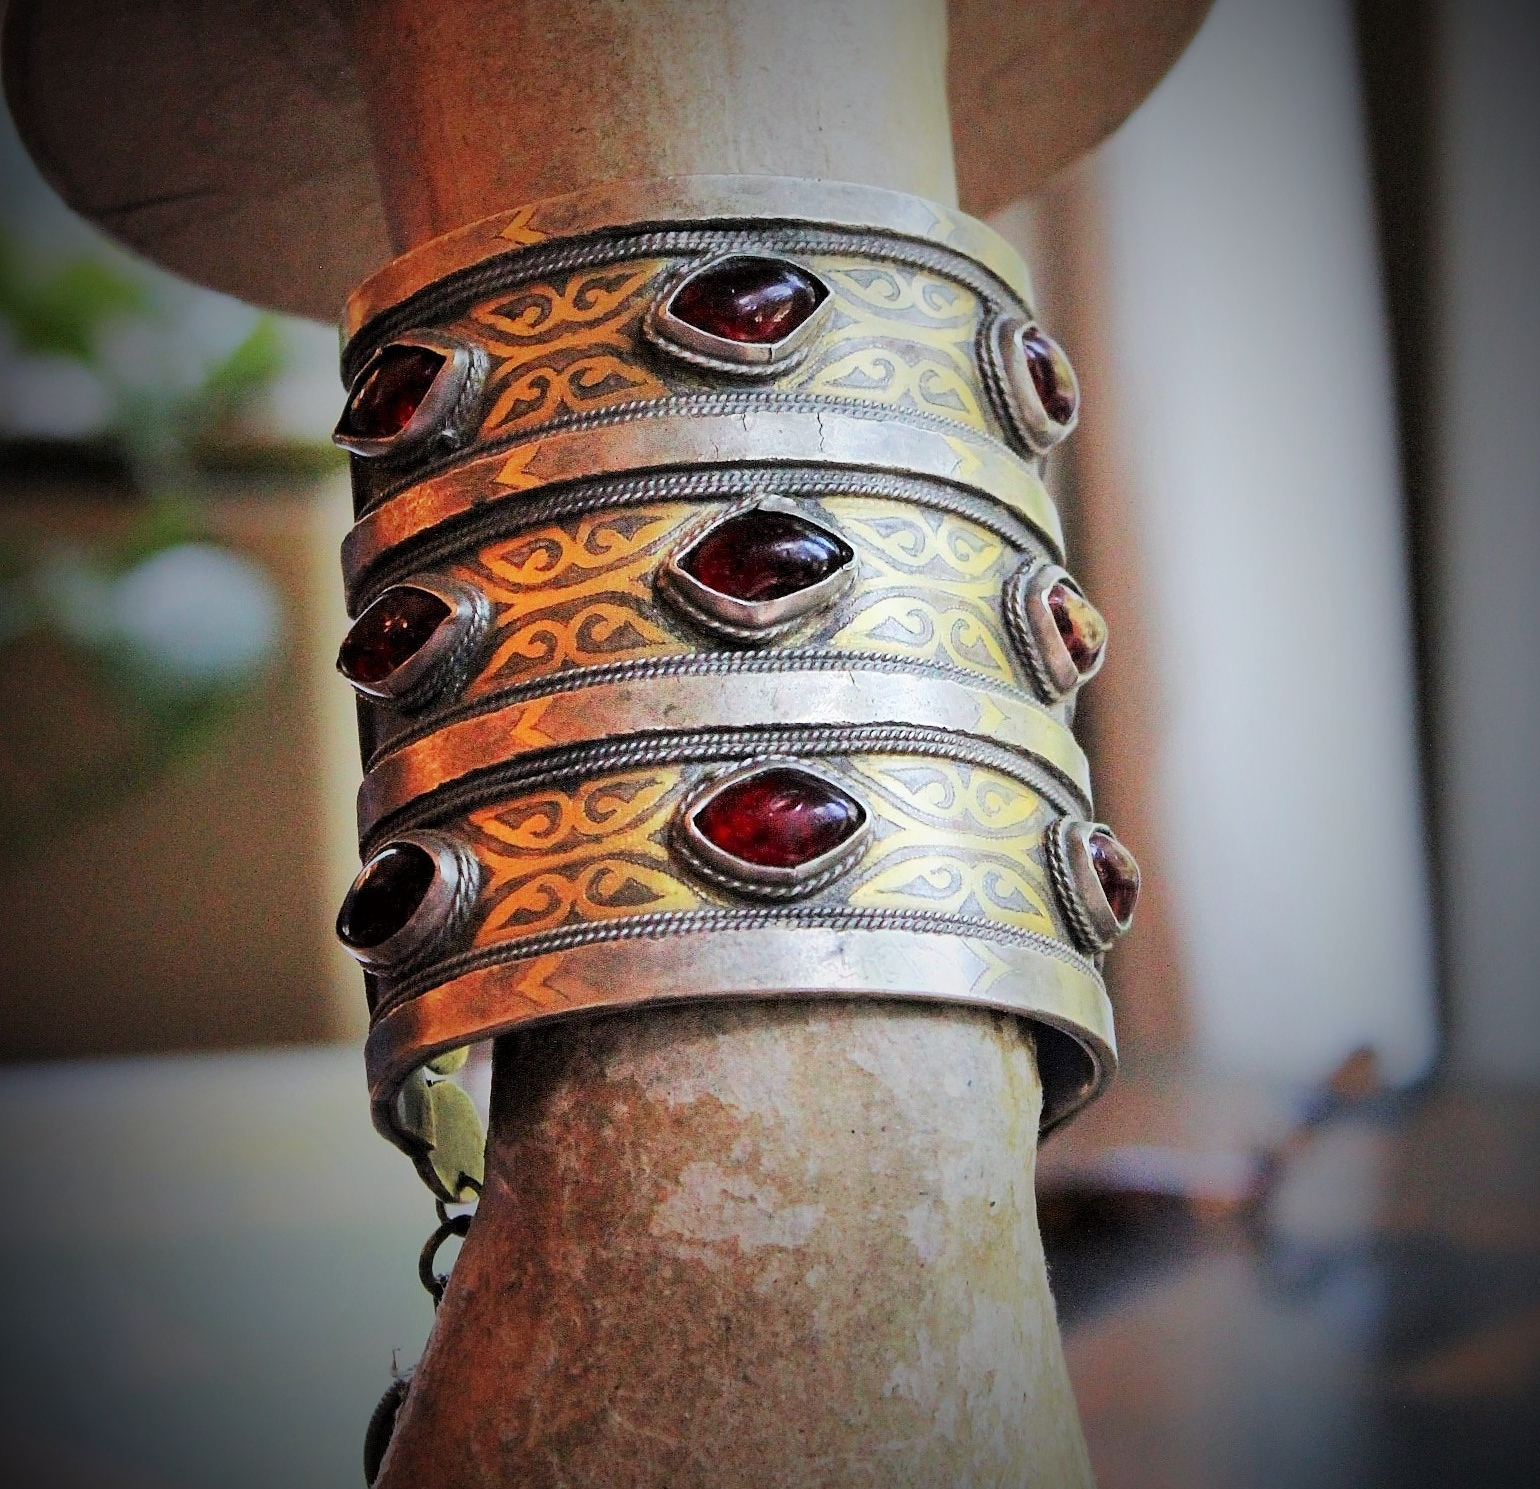 The Presence of God Wide Cuff Bracelet w/Amazing Gypsy Cuff,Antique & Vintage Medals and Drops,Beaded Banjara Tassel,Faceted Quartz Point & More!